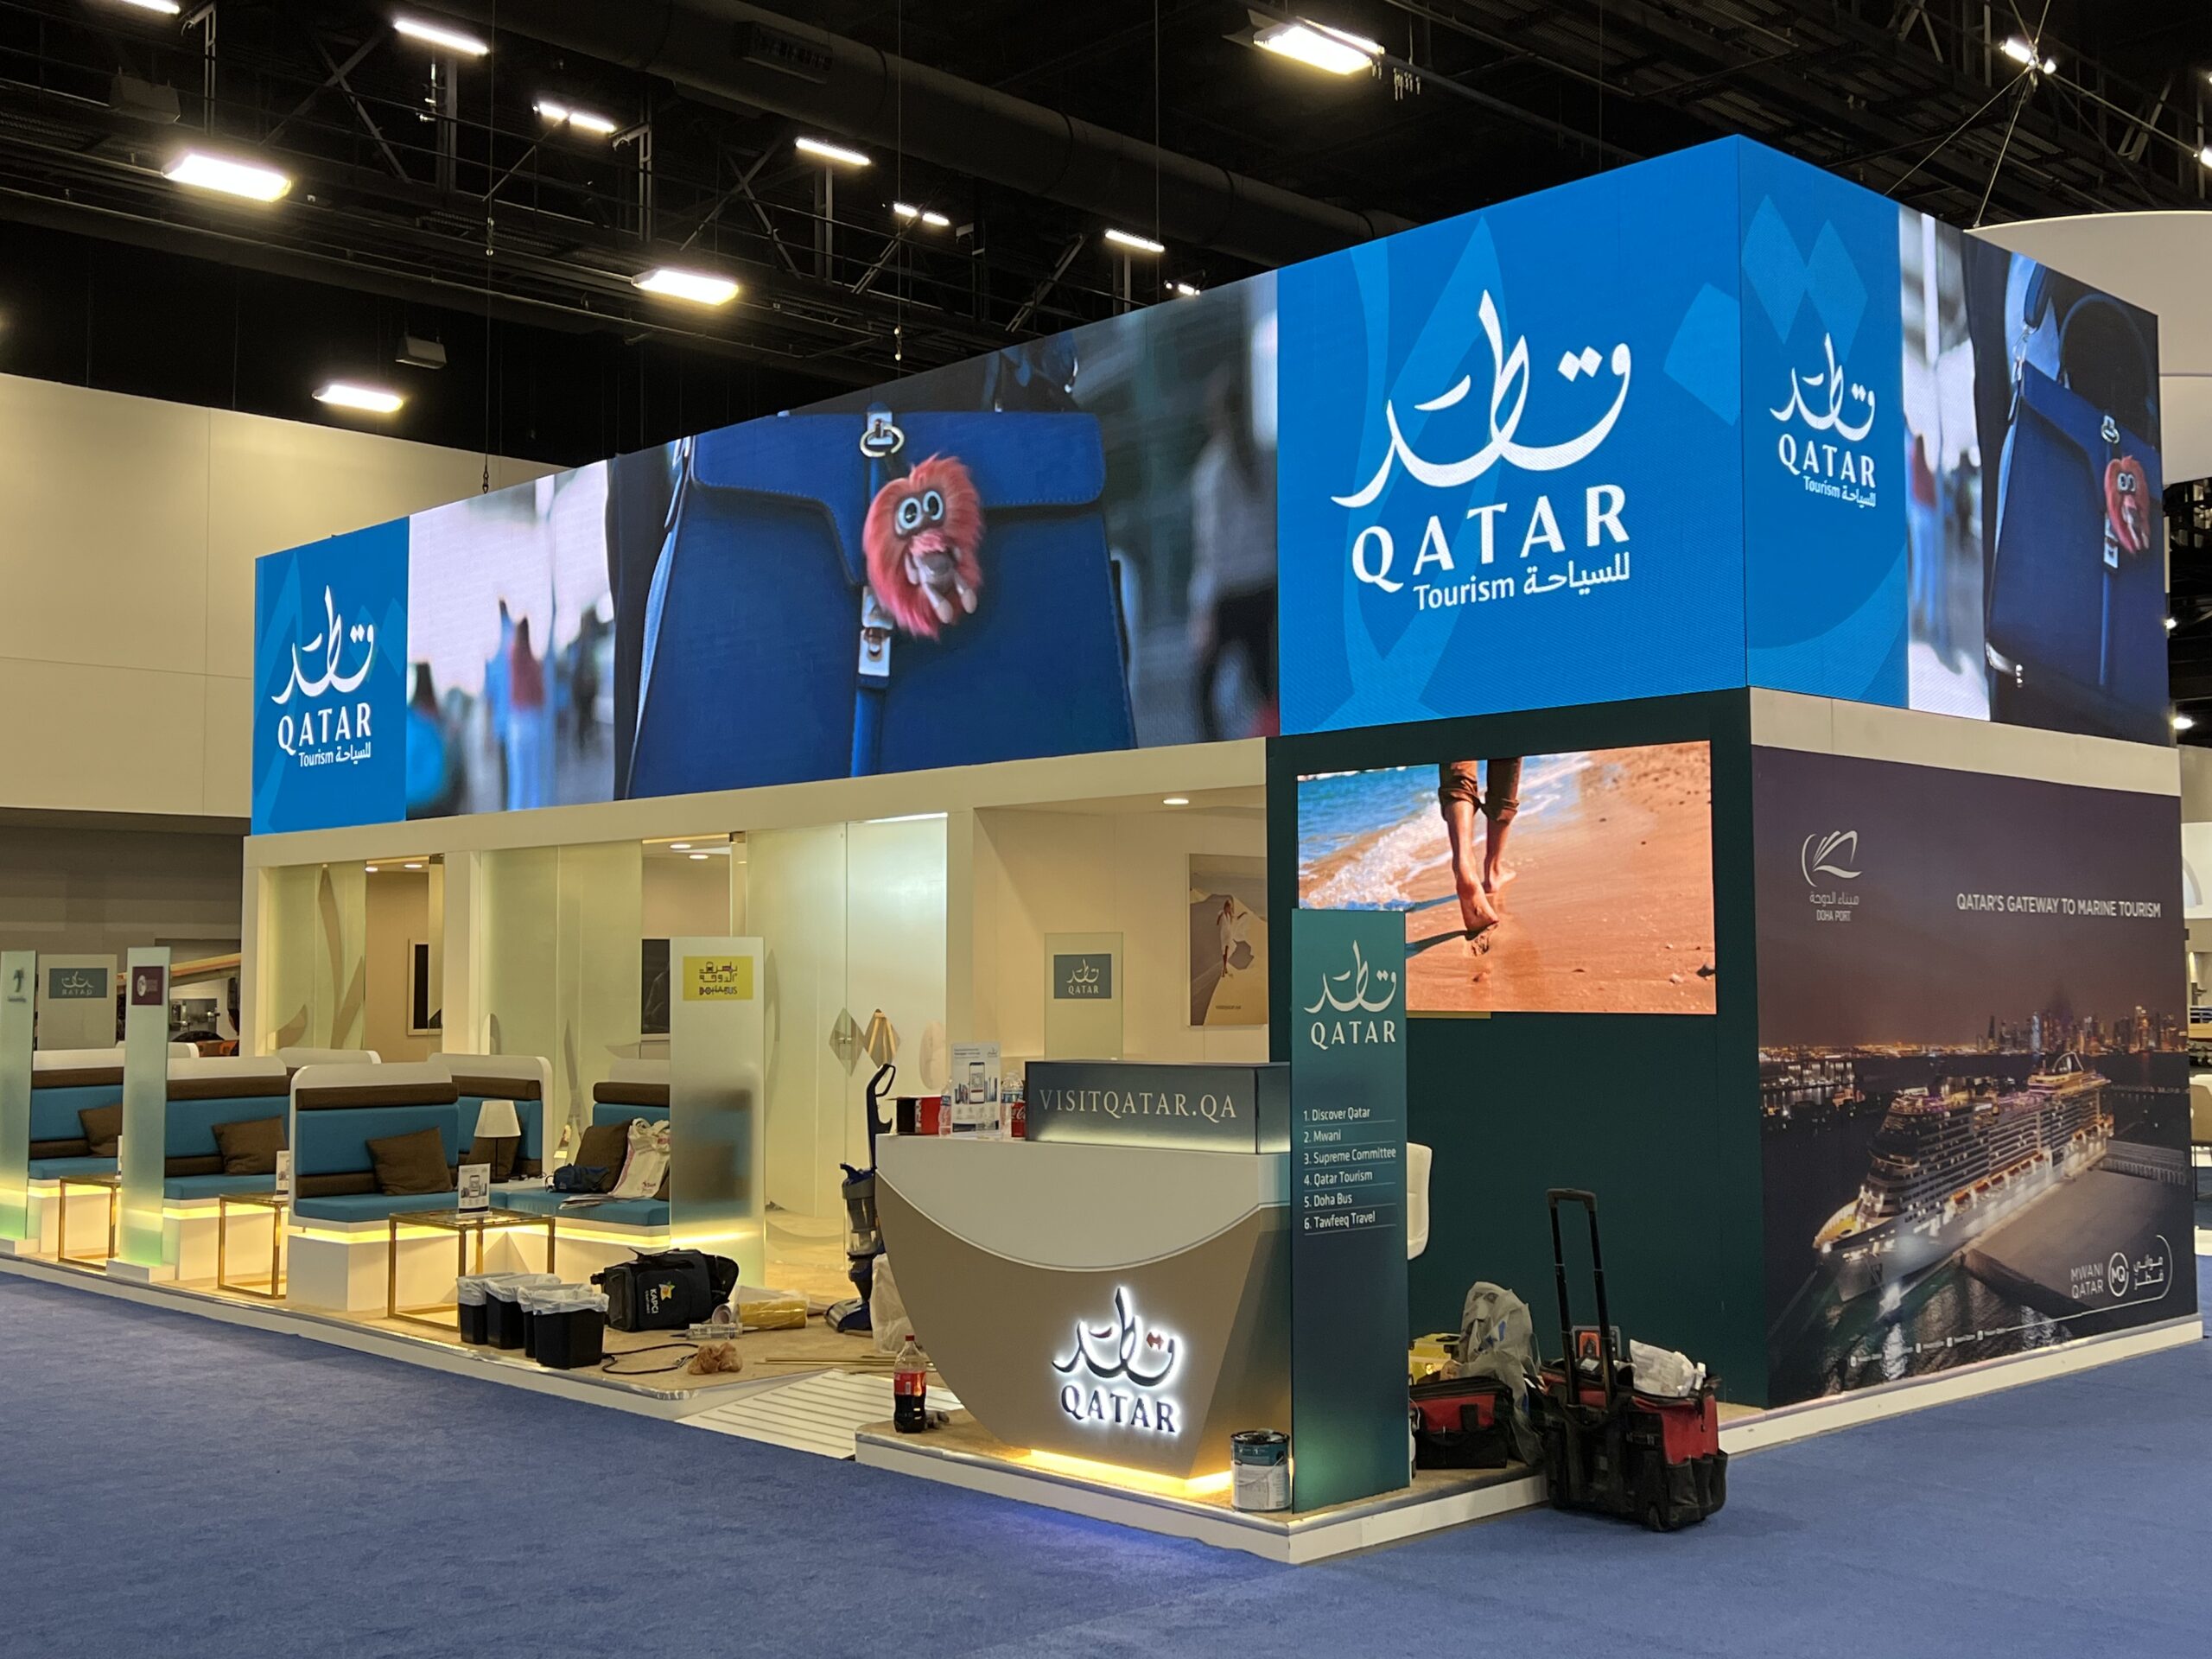 Qatar Seatrade Cruise Global Structure Top Led Video Wall